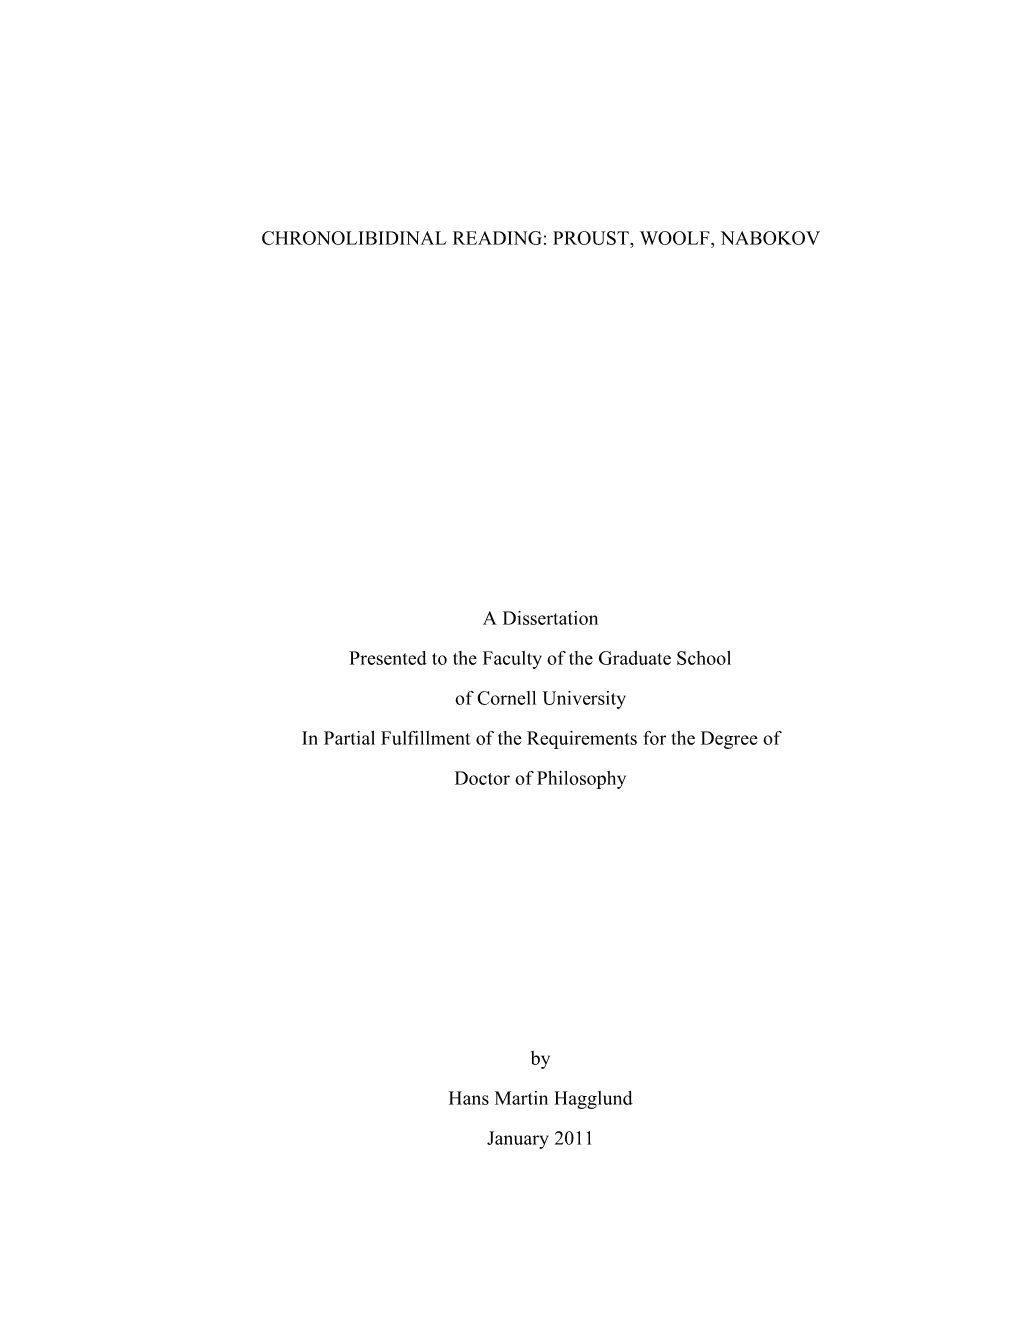 PROUST, WOOLF, NABOKOV a Dissertation Presented to the Faculty of the Graduate School of Cornell Univer